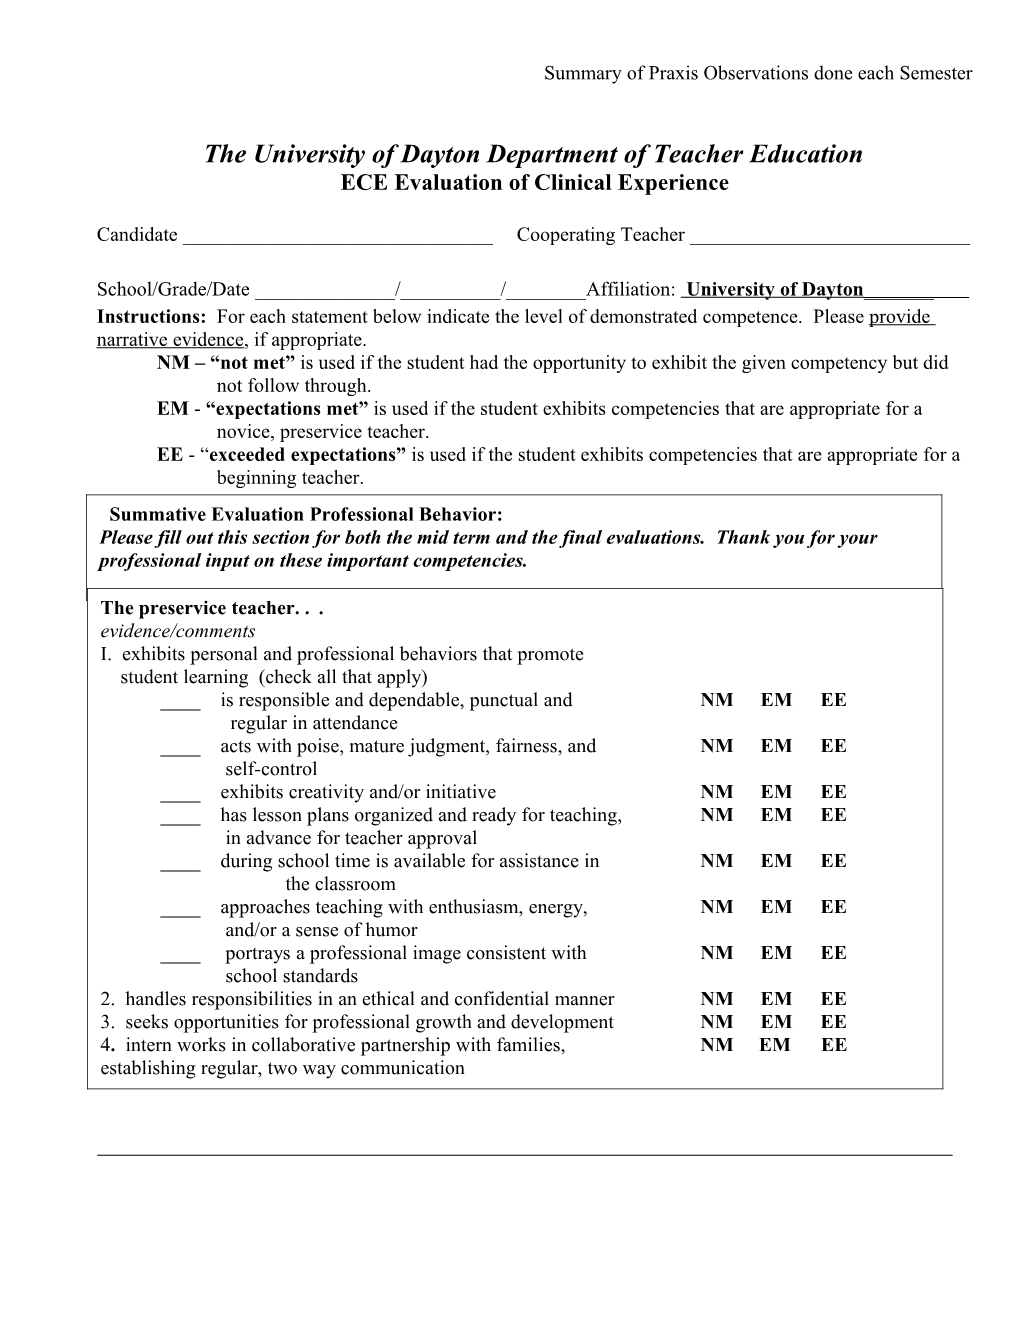 S4.4A.E3.ECE Pathwise Observation Form (NAEYC Alignment) - Summary